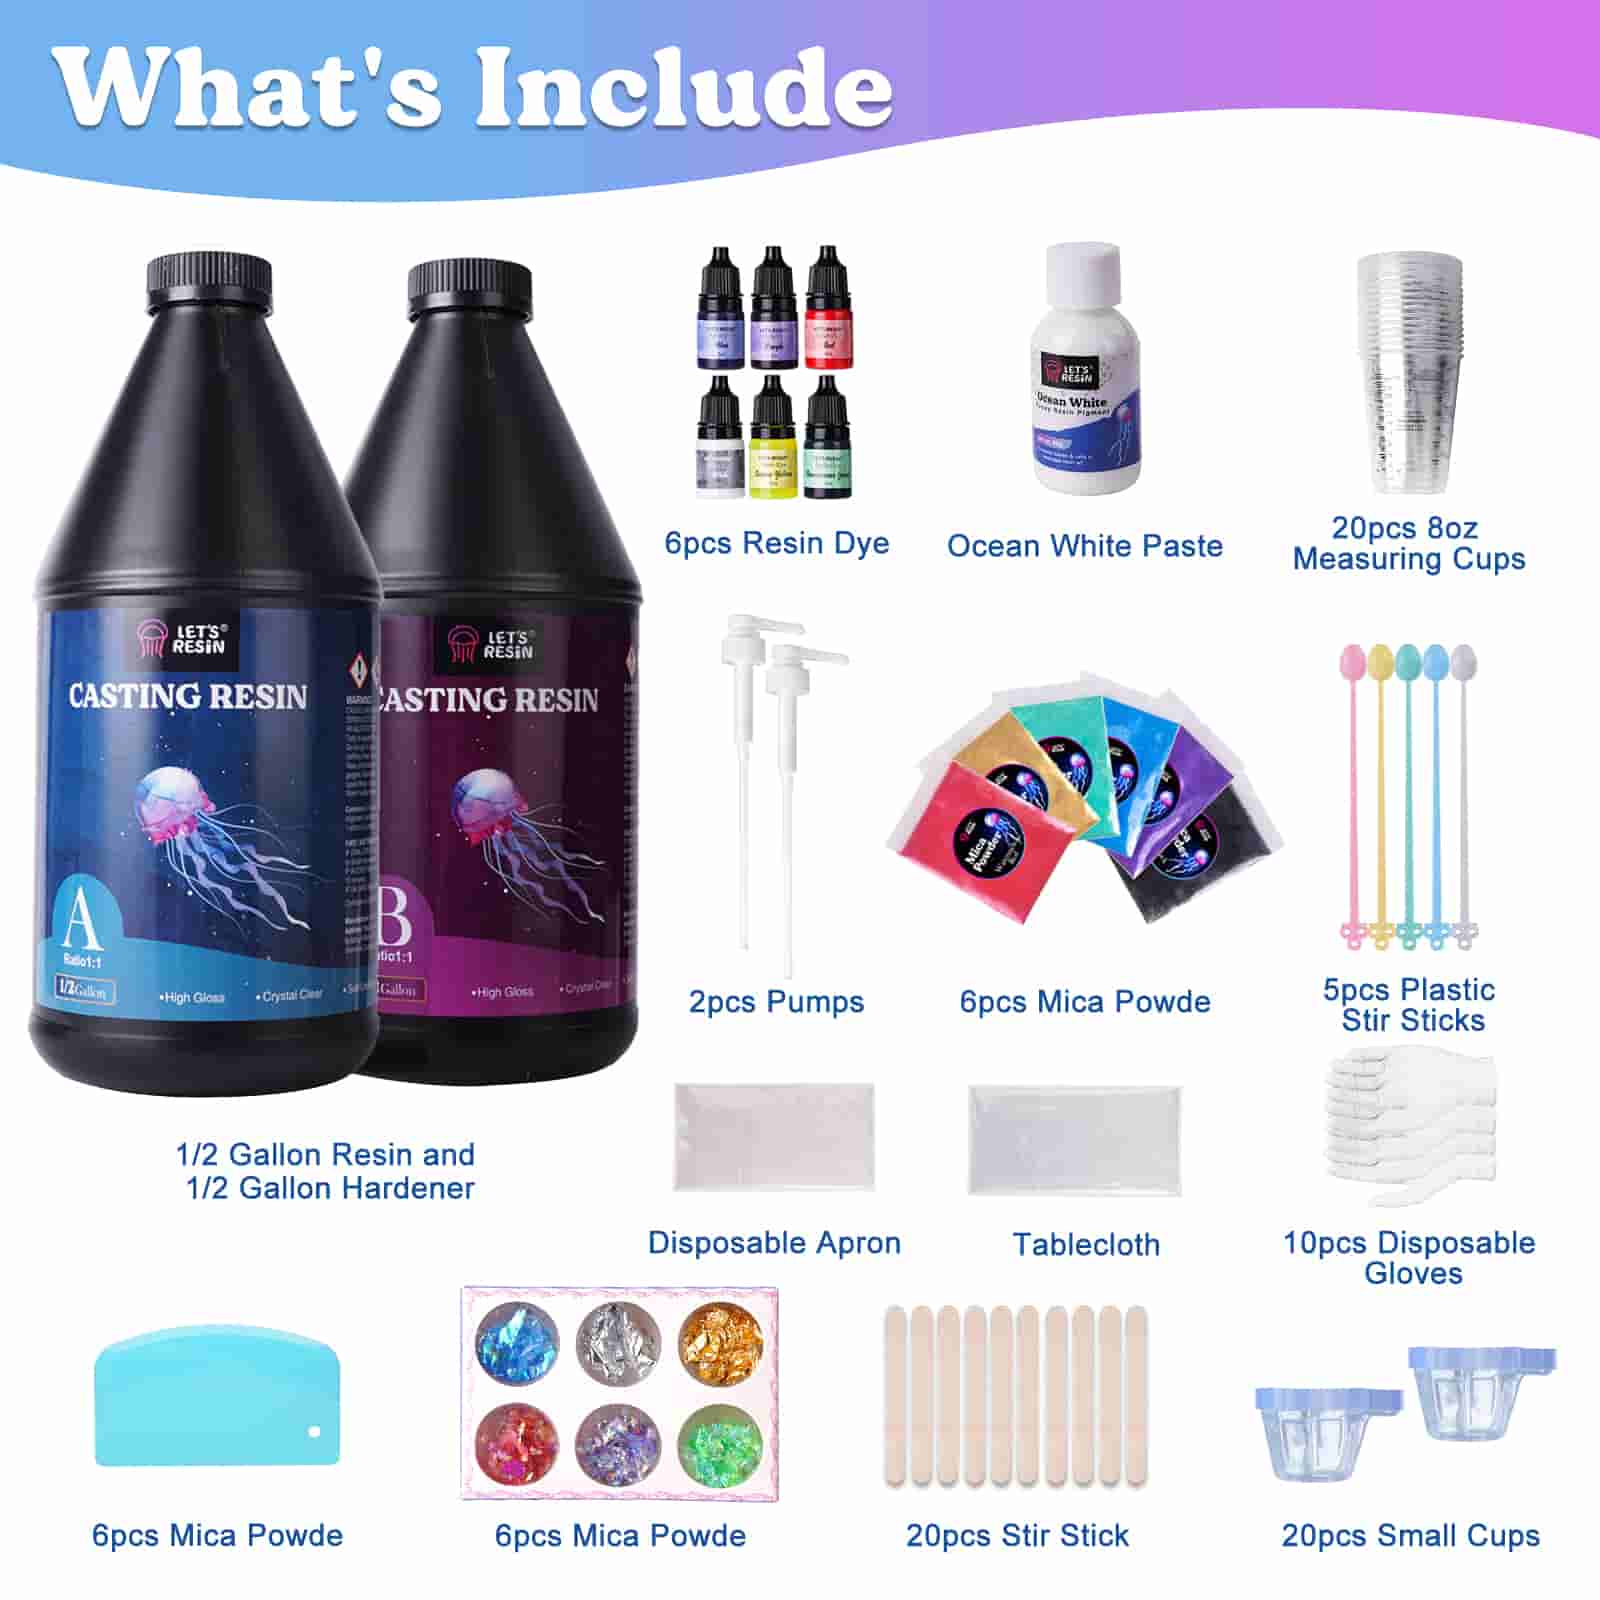 Let's Resin 1 Gallon Epoxy Resin Kit with Pumps, Resin Dye, and Mica Powder